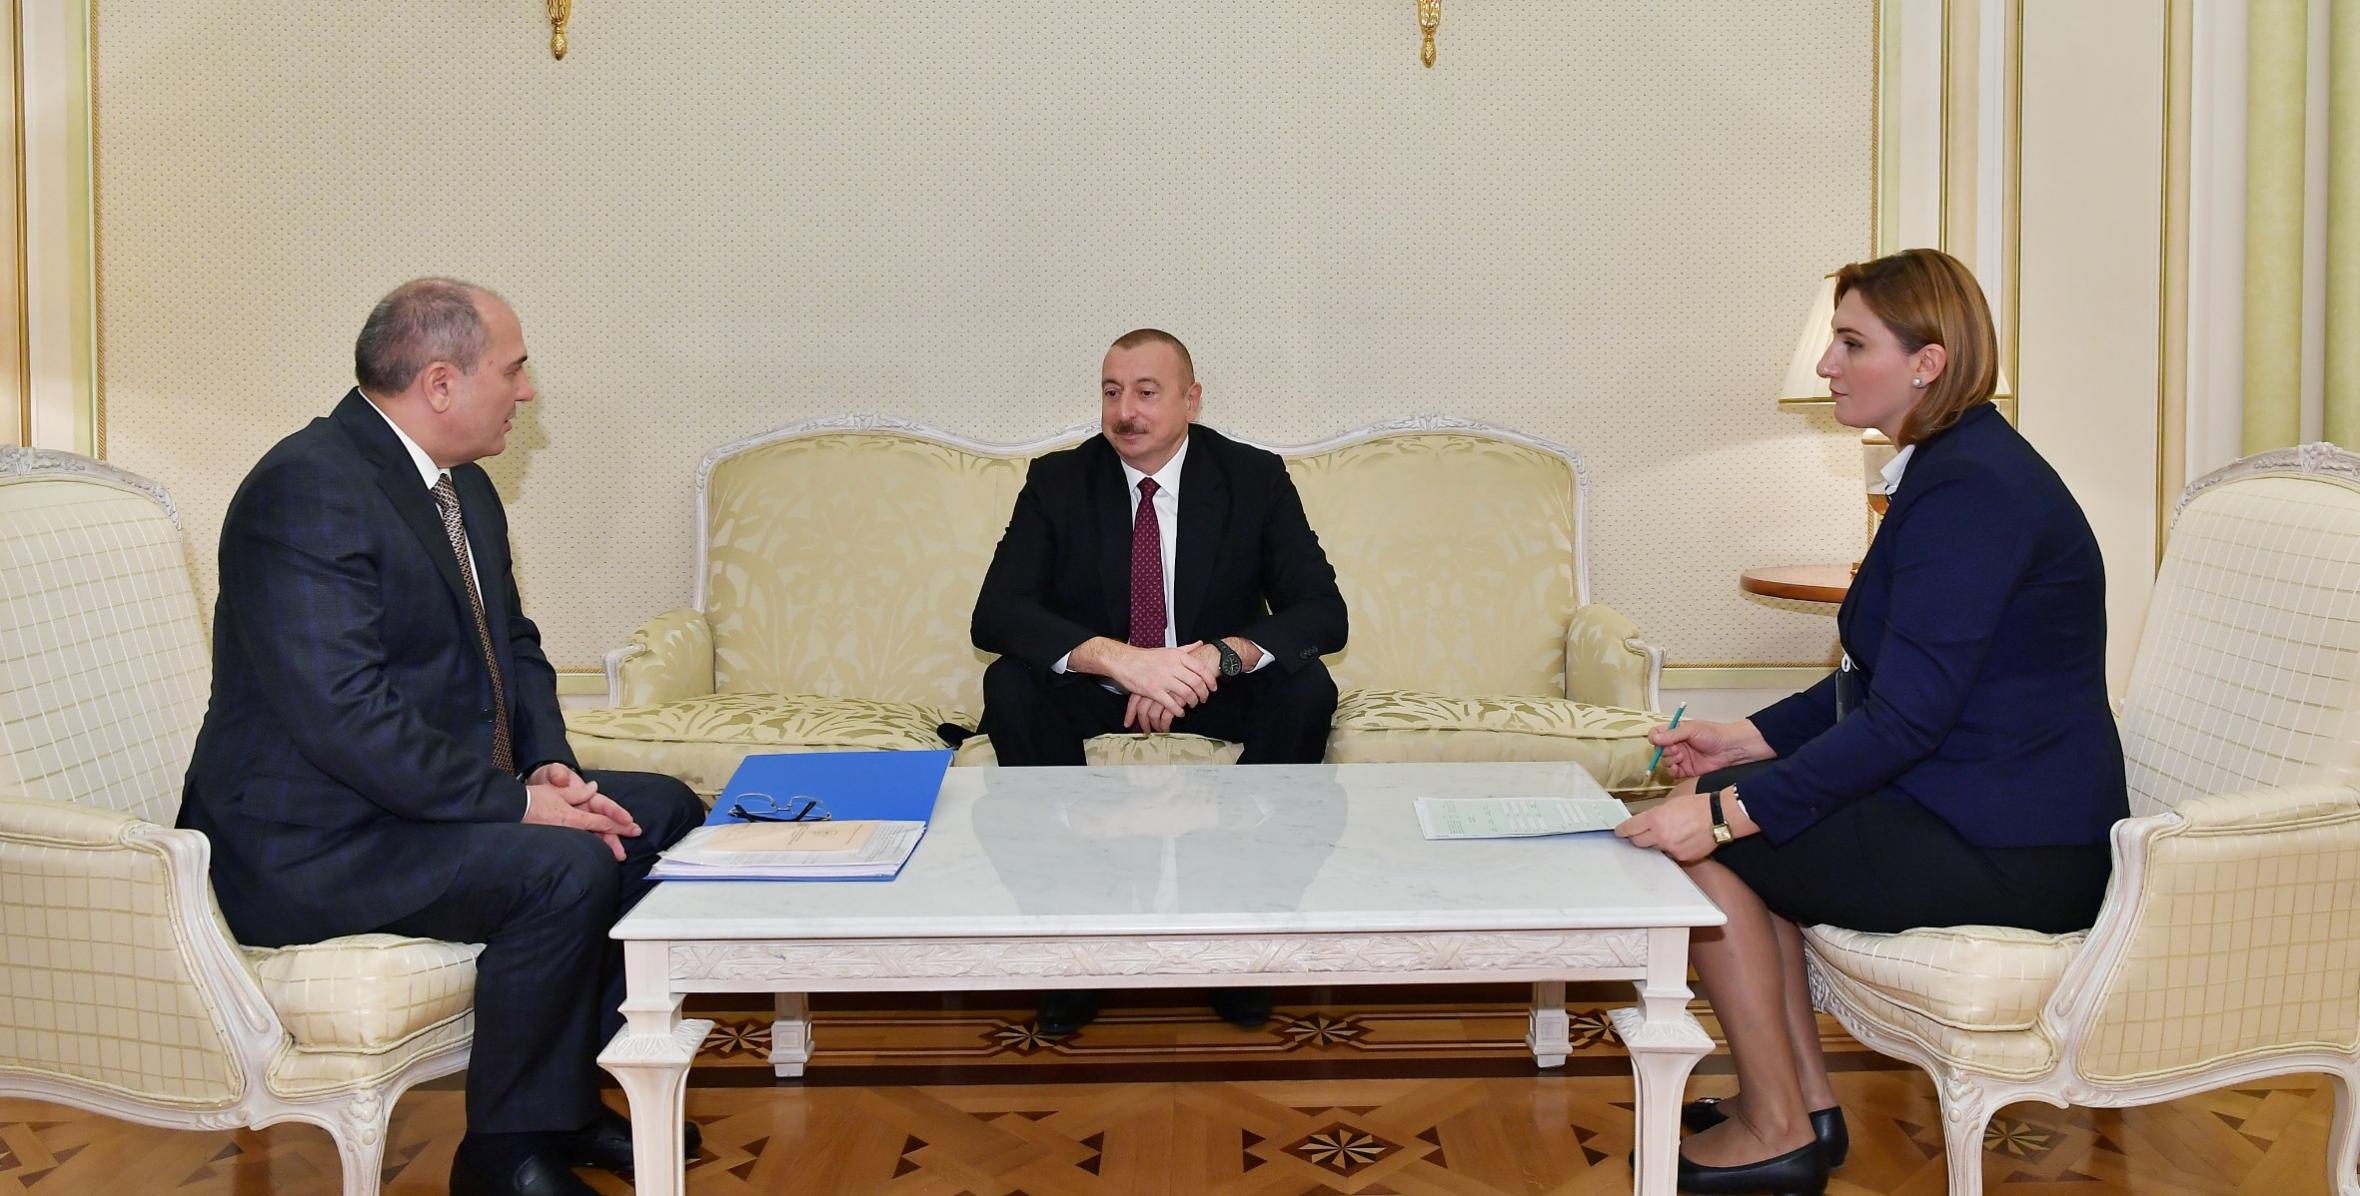 Ilham Aliyev participated in Azerbaijani census, responded to census survey questions